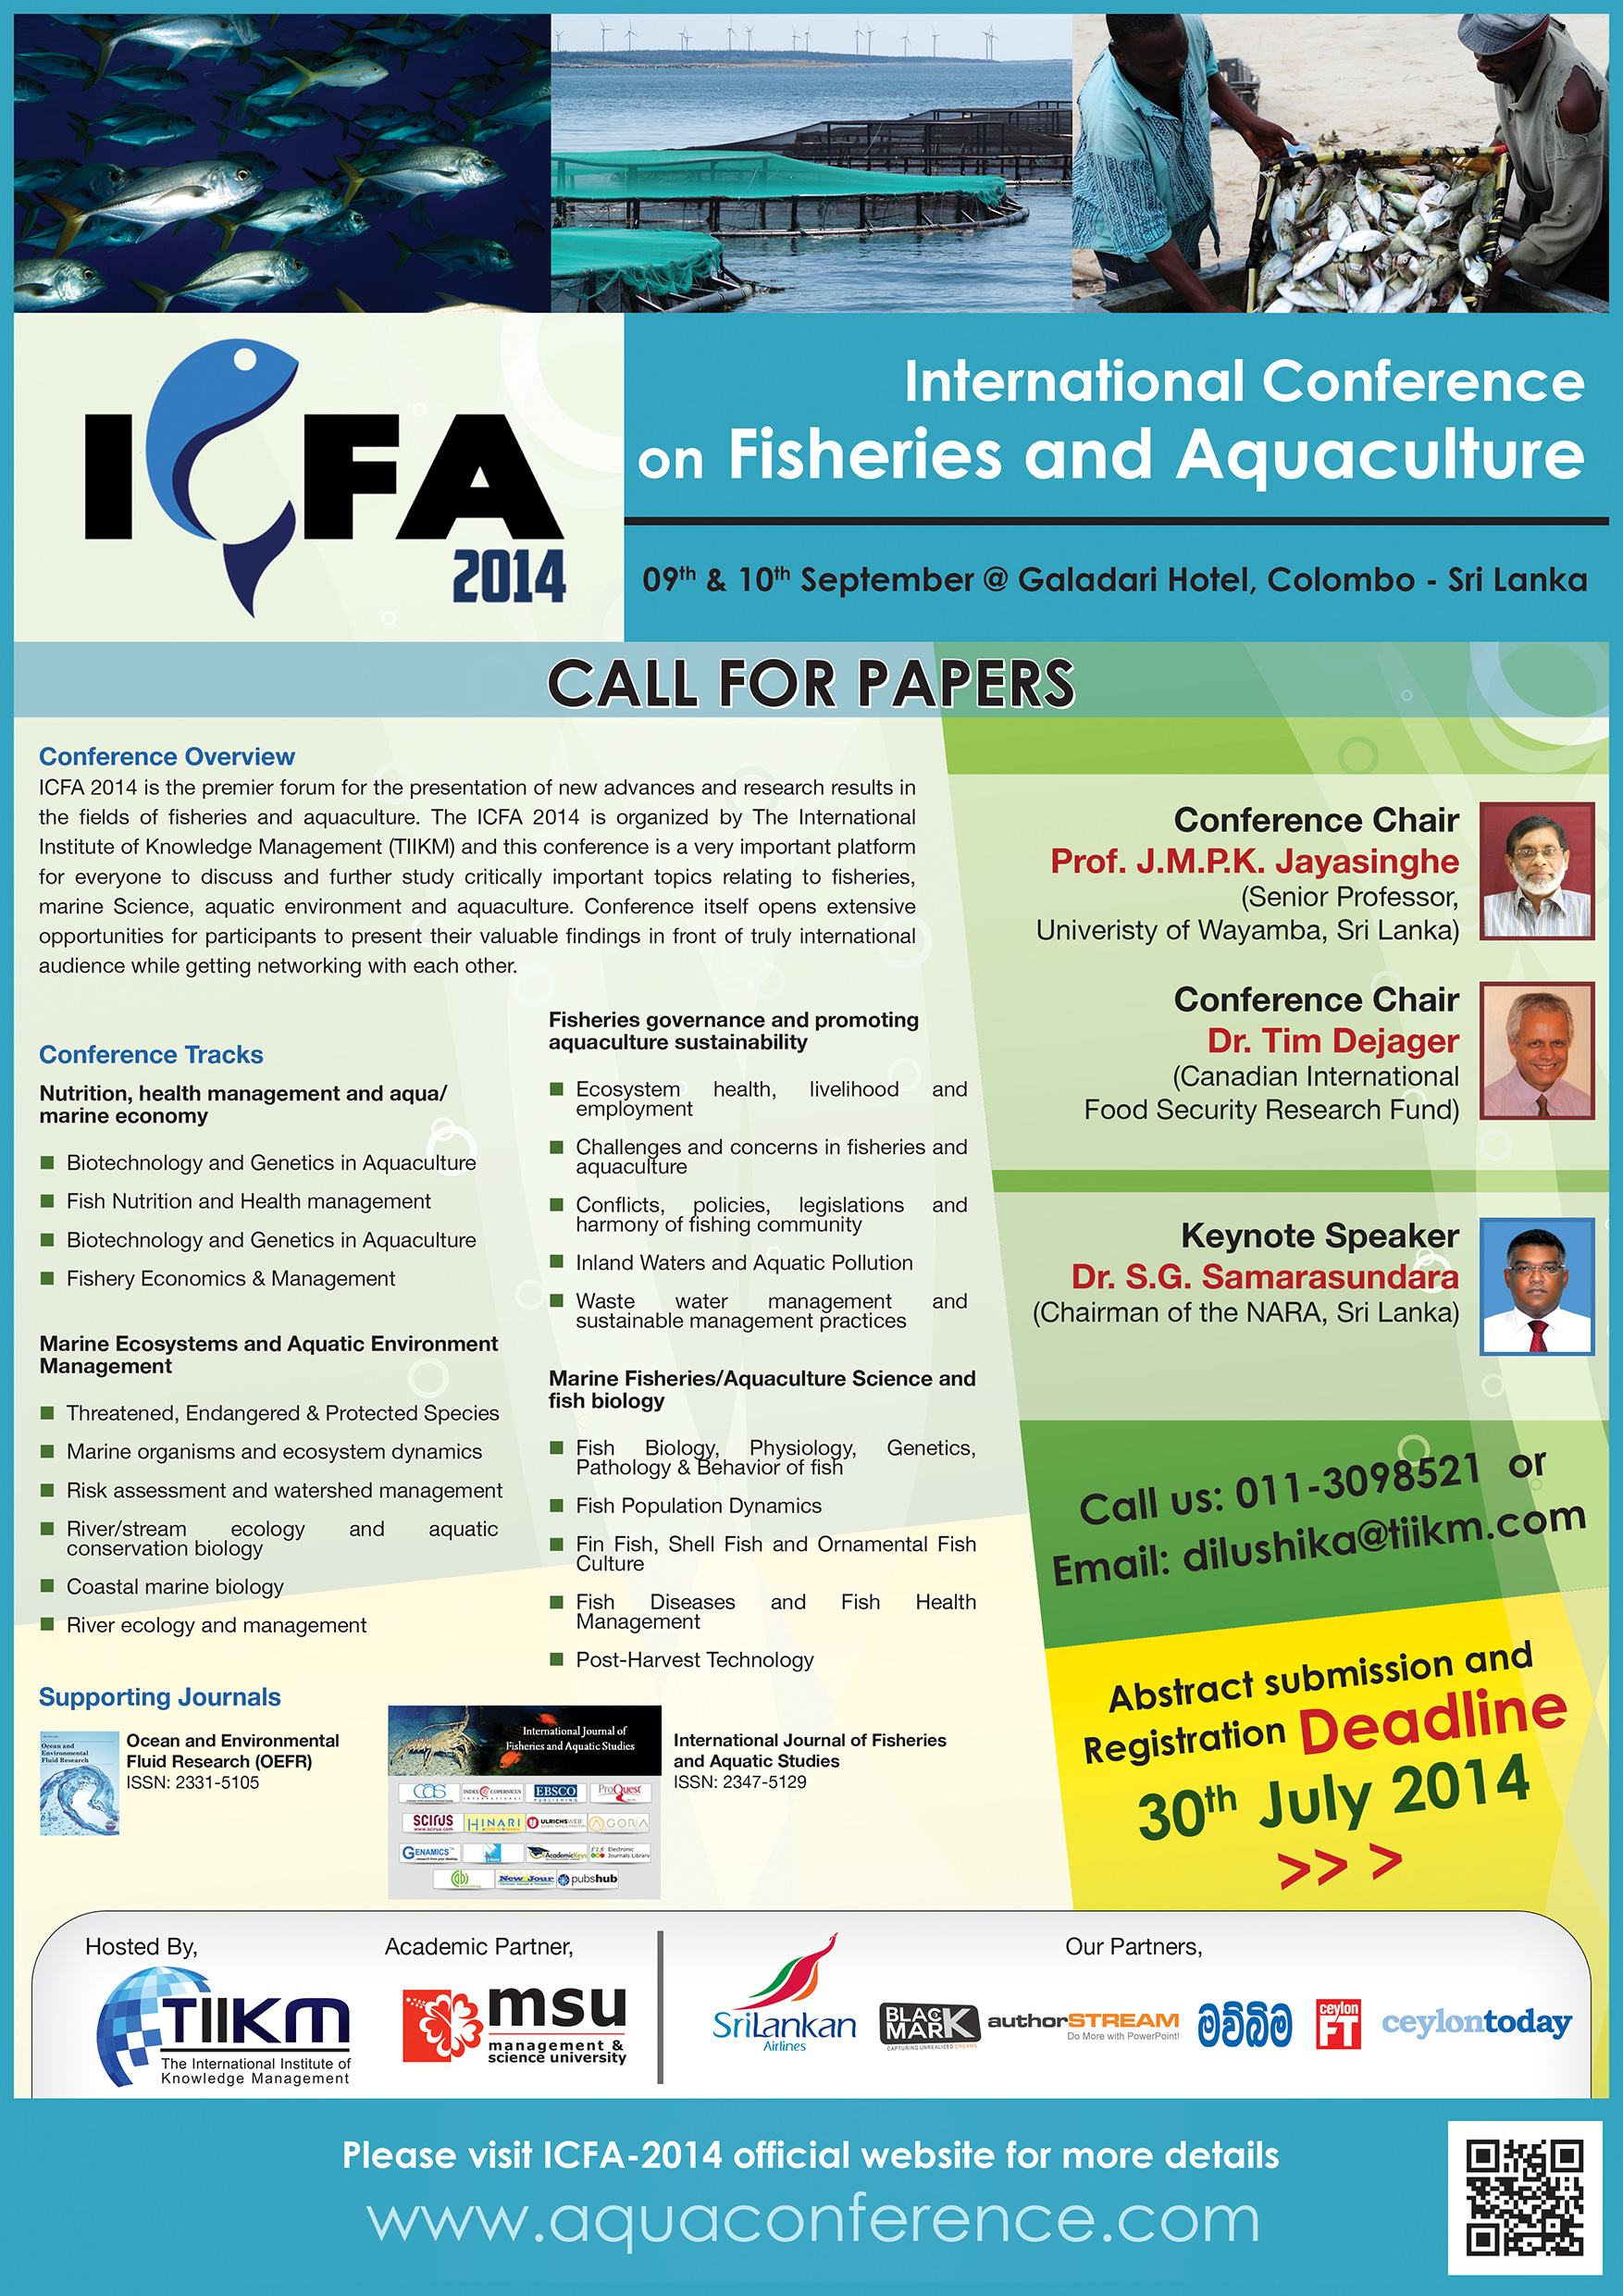 Call for Papers: On behalf of Conference Organizing Committee, it is a great privilege to invite you to the International Conference on Fisherie...